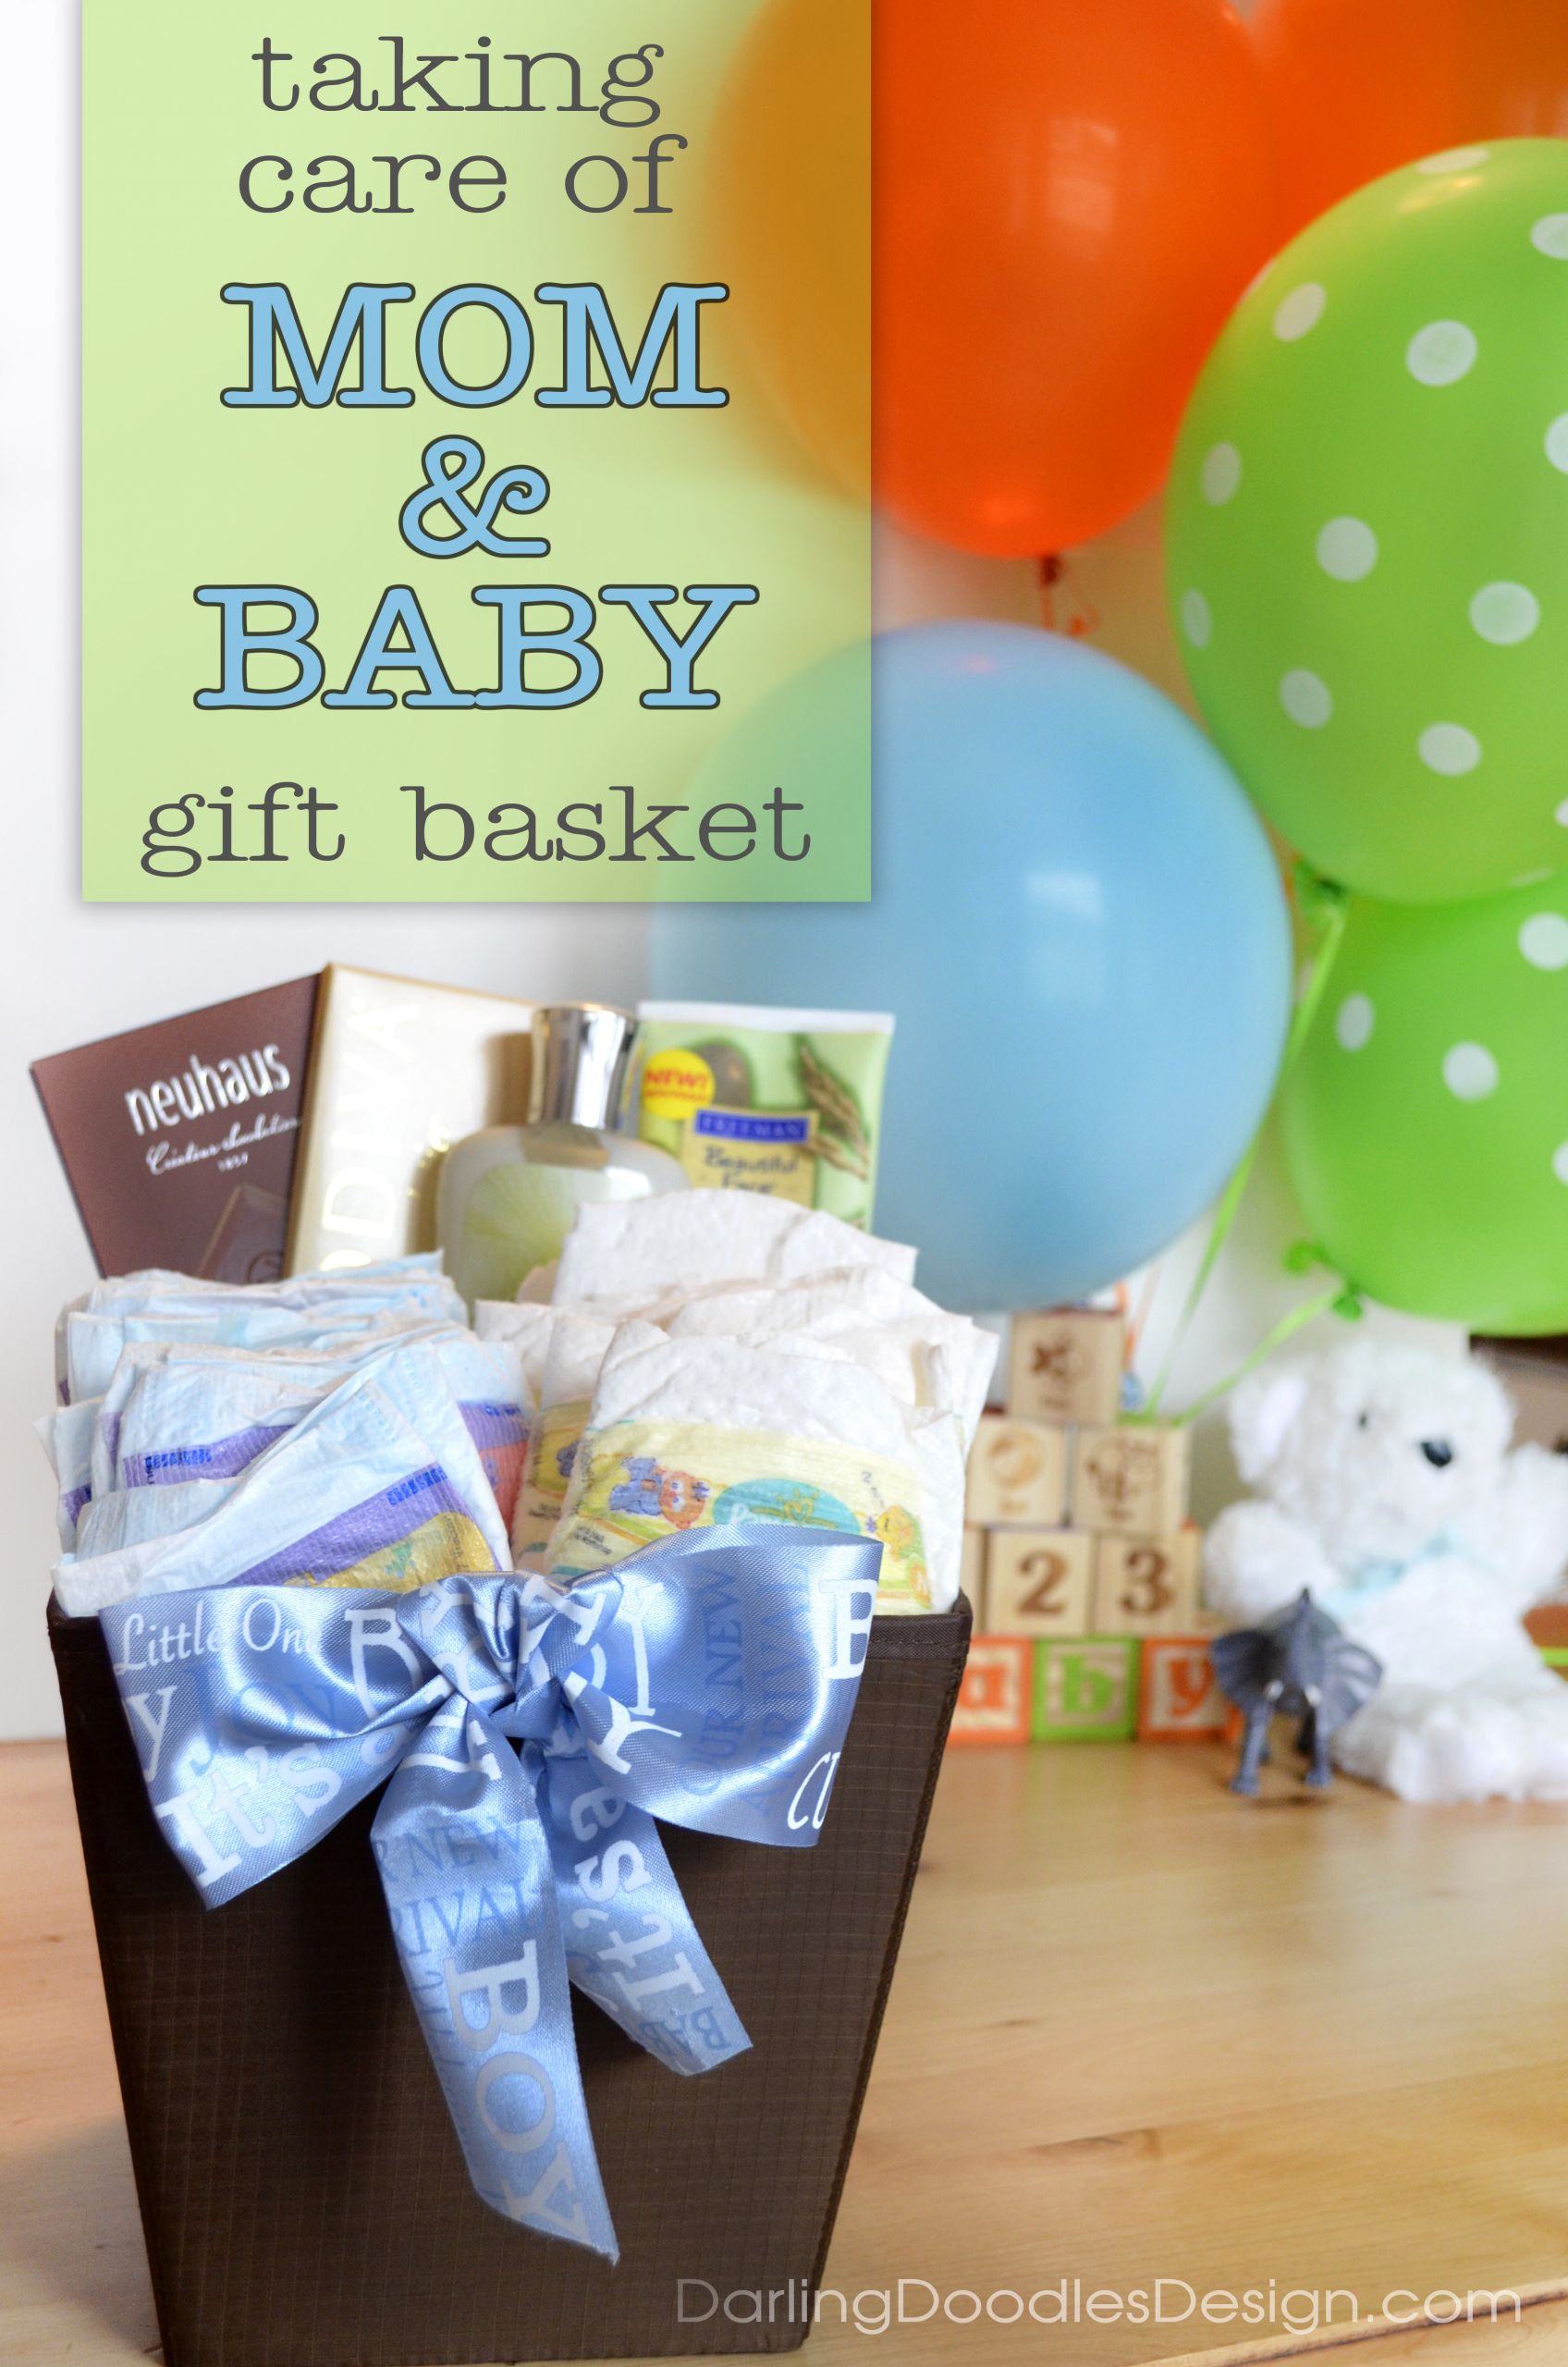 Baby Shower Gifts For The Mom
 A Baby Shower Gift for Mom & Baby Darling Doodles